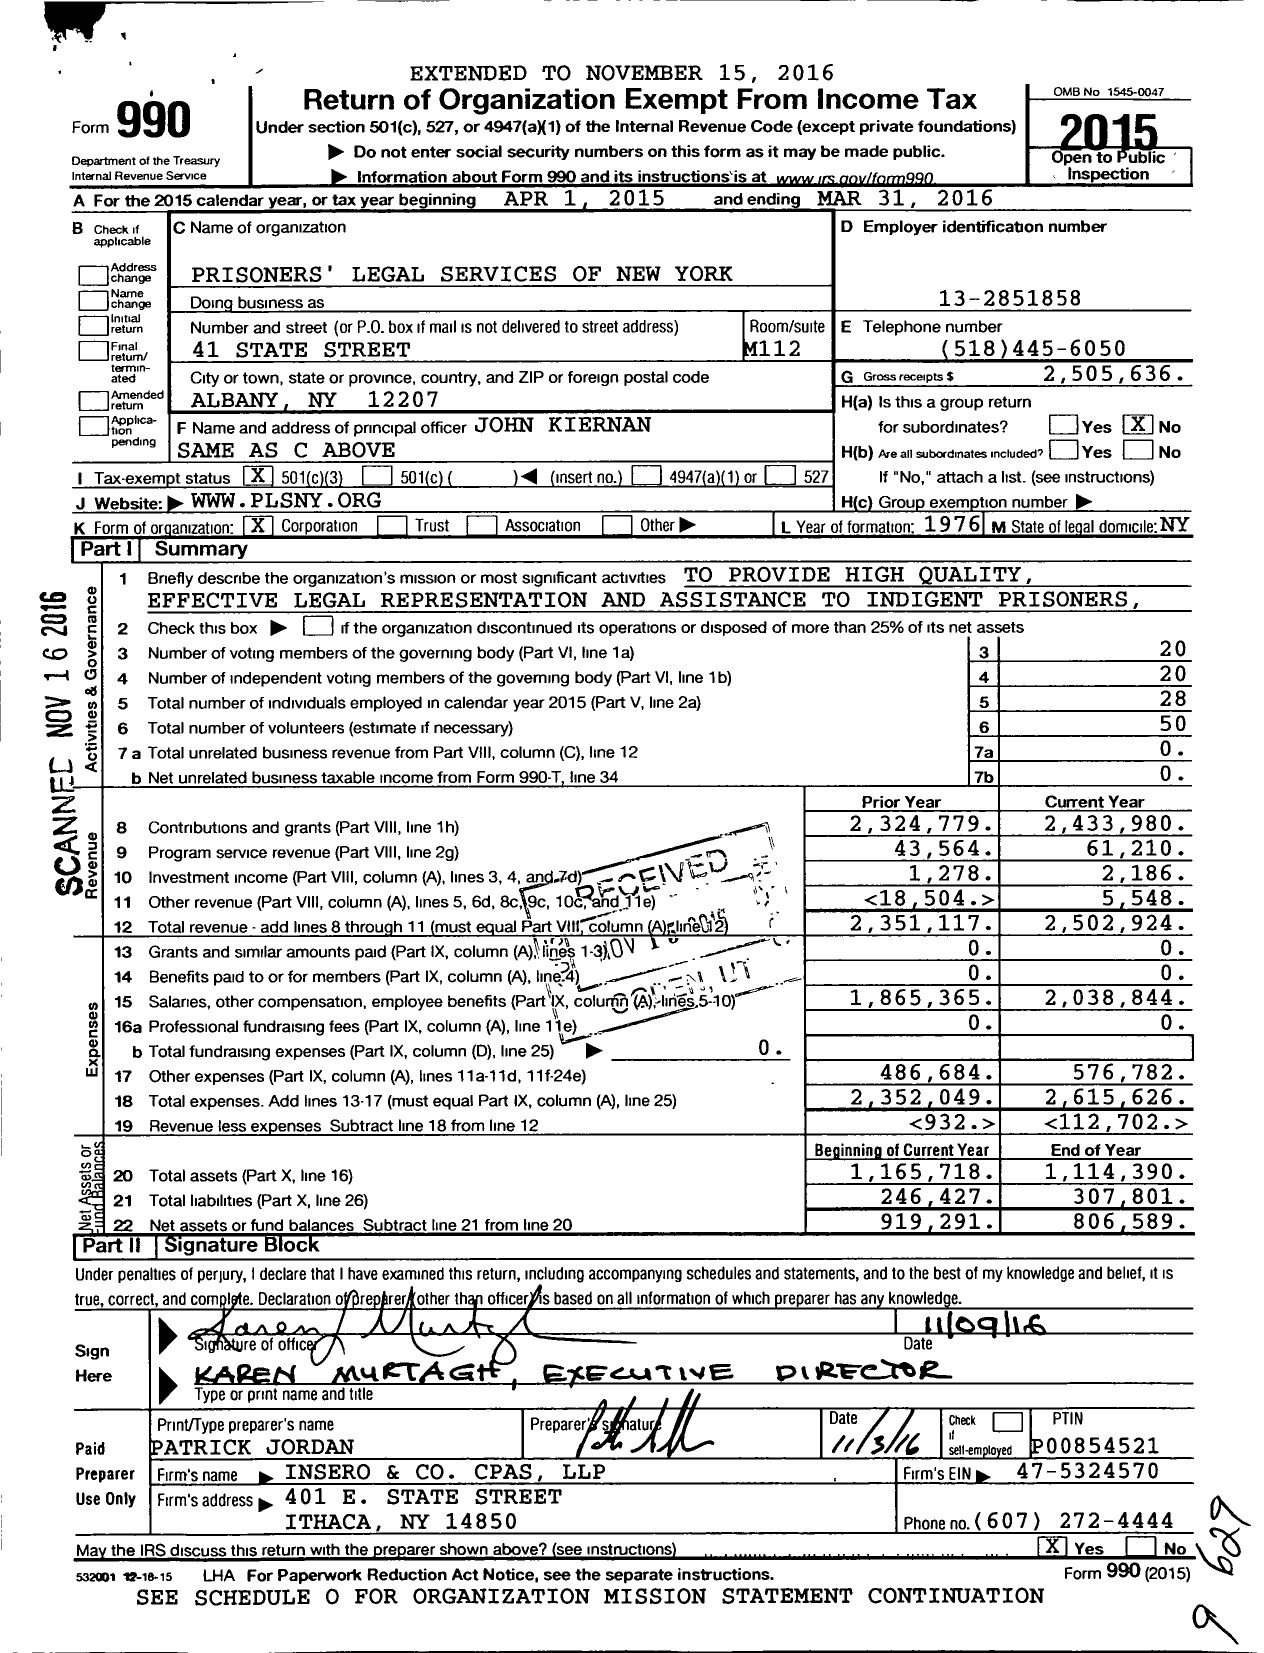 Image of first page of 2015 Form 990 for Prisoners Legal Services of New York